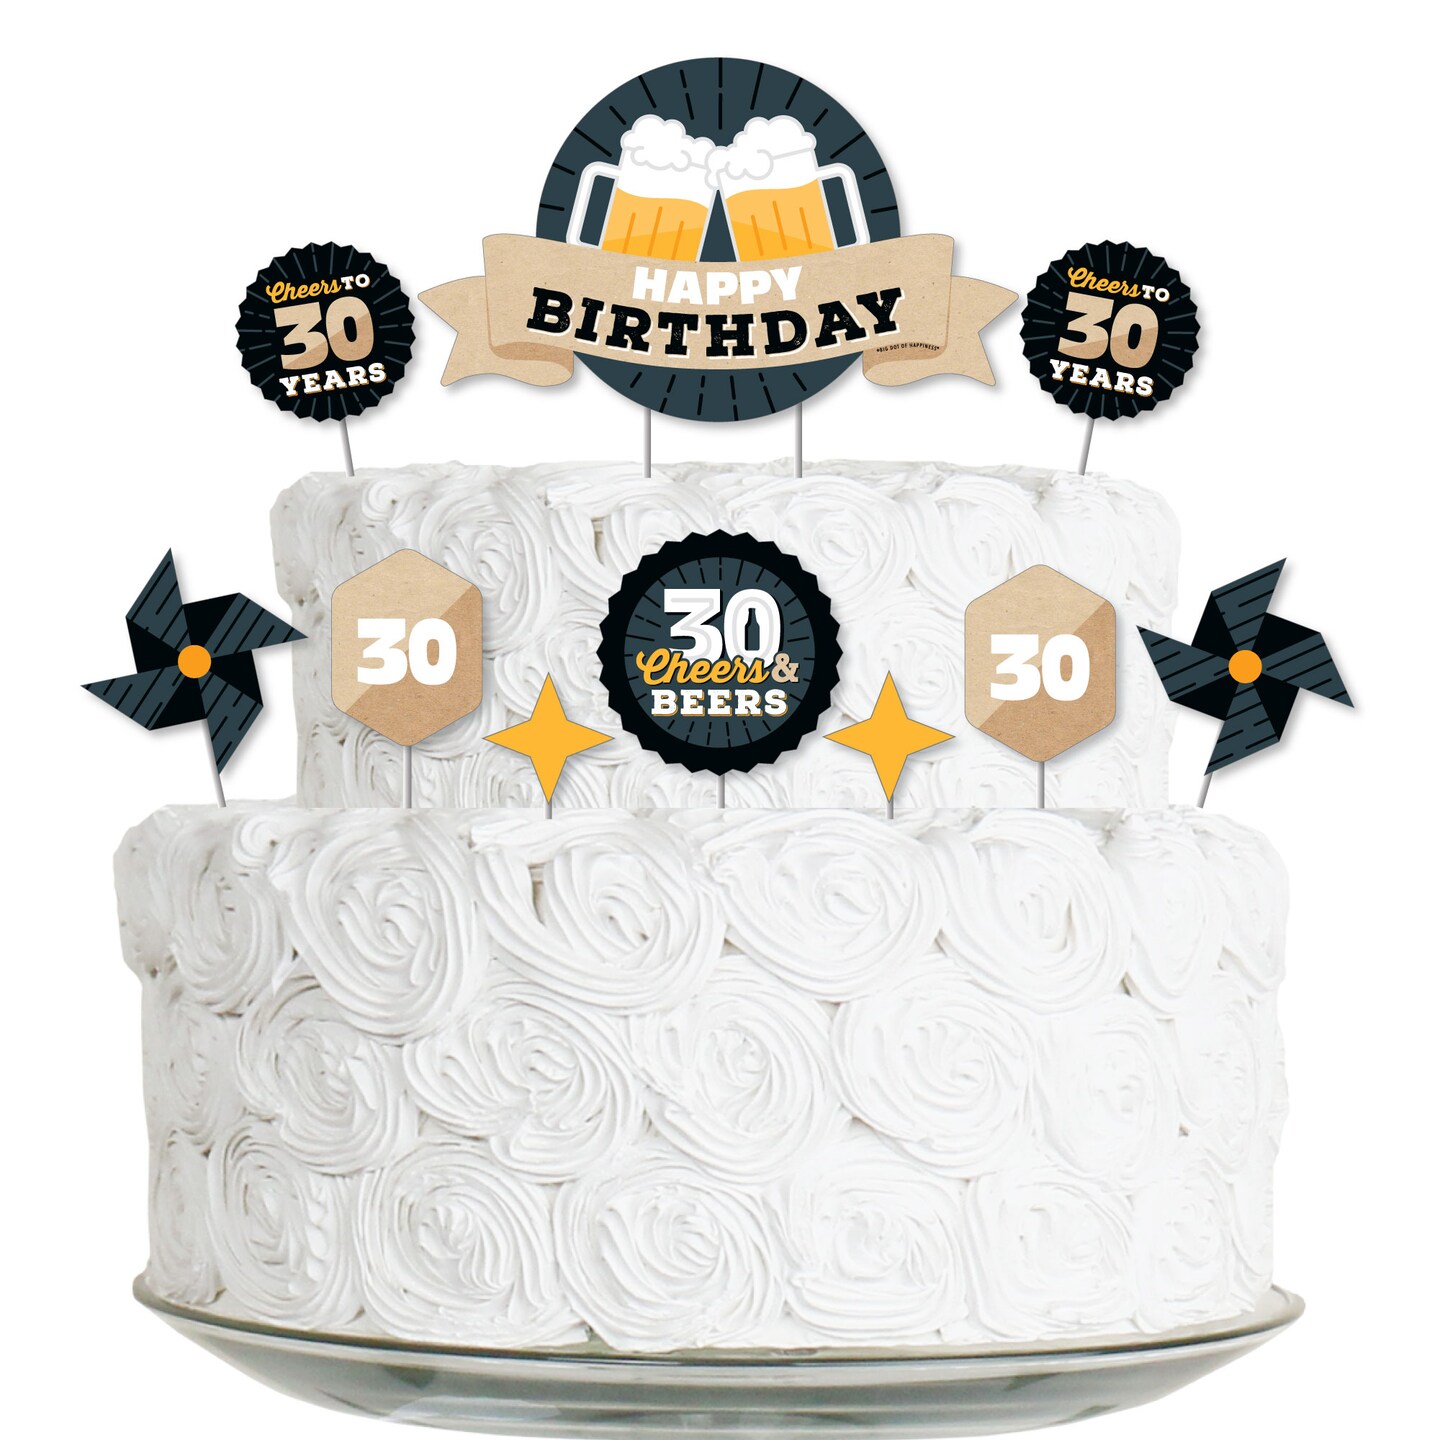 Birthday Cake For 30 Year Old Women - CakeCentral.com